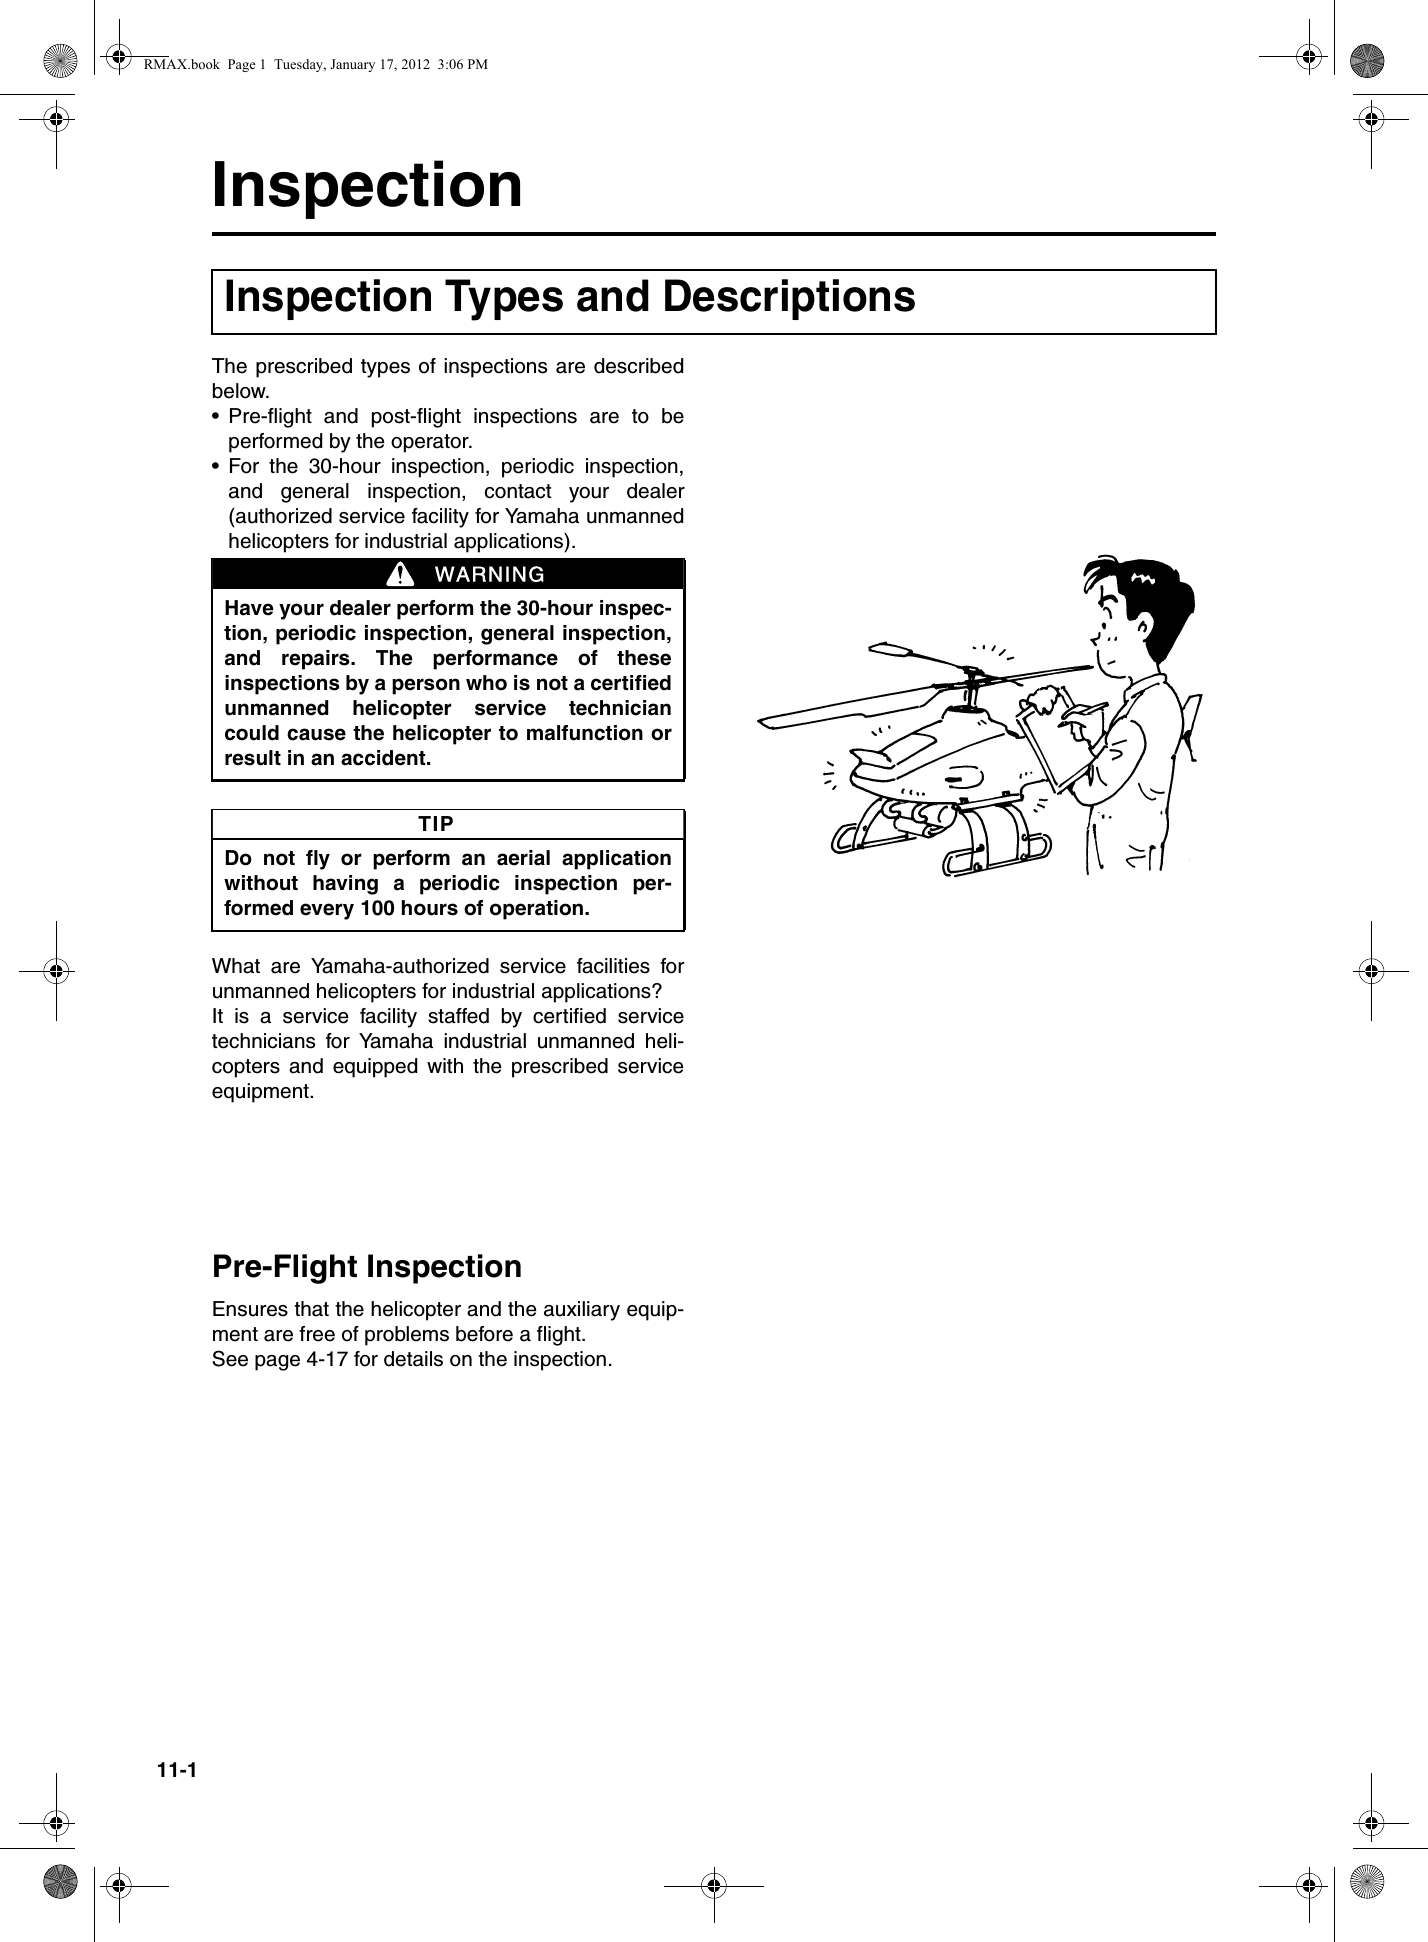 11-1InspectionThe prescribed types of inspections are describedbelow.•Pre-flight and post-flight inspections are to beperformed by the operator.•For the 30-hour inspection, periodic inspection,and general inspection, contact your dealer(authorized service facility for Yamaha unmannedhelicopters for industrial applications).What are Yamaha-authorized service facilities forunmanned helicopters for industrial applications?It is a service facility staffed by certified servicetechnicians for Yamaha industrial unmanned heli-copters and equipped with the prescribed serviceequipment.Pre-Flight InspectionEnsures that the helicopter and the auxiliary equip-ment are free of problems before a flight.See page 4-17 for details on the inspection.Inspection Types and DescriptionsHave your dealer perform the 30-hour inspec-tion, periodic inspection, general inspection,and repairs. The performance of theseinspections by a person who is not a certifiedunmanned helicopter service techniciancould cause the helicopter to malfunction orresult in an accident.Do not fly or perform an aerial applicationwithout having a periodic inspection per-formed every 100 hours of operation.WARNINGTIPRMAX.book  Page 1  Tuesday, January 17, 2012  3:06 PM